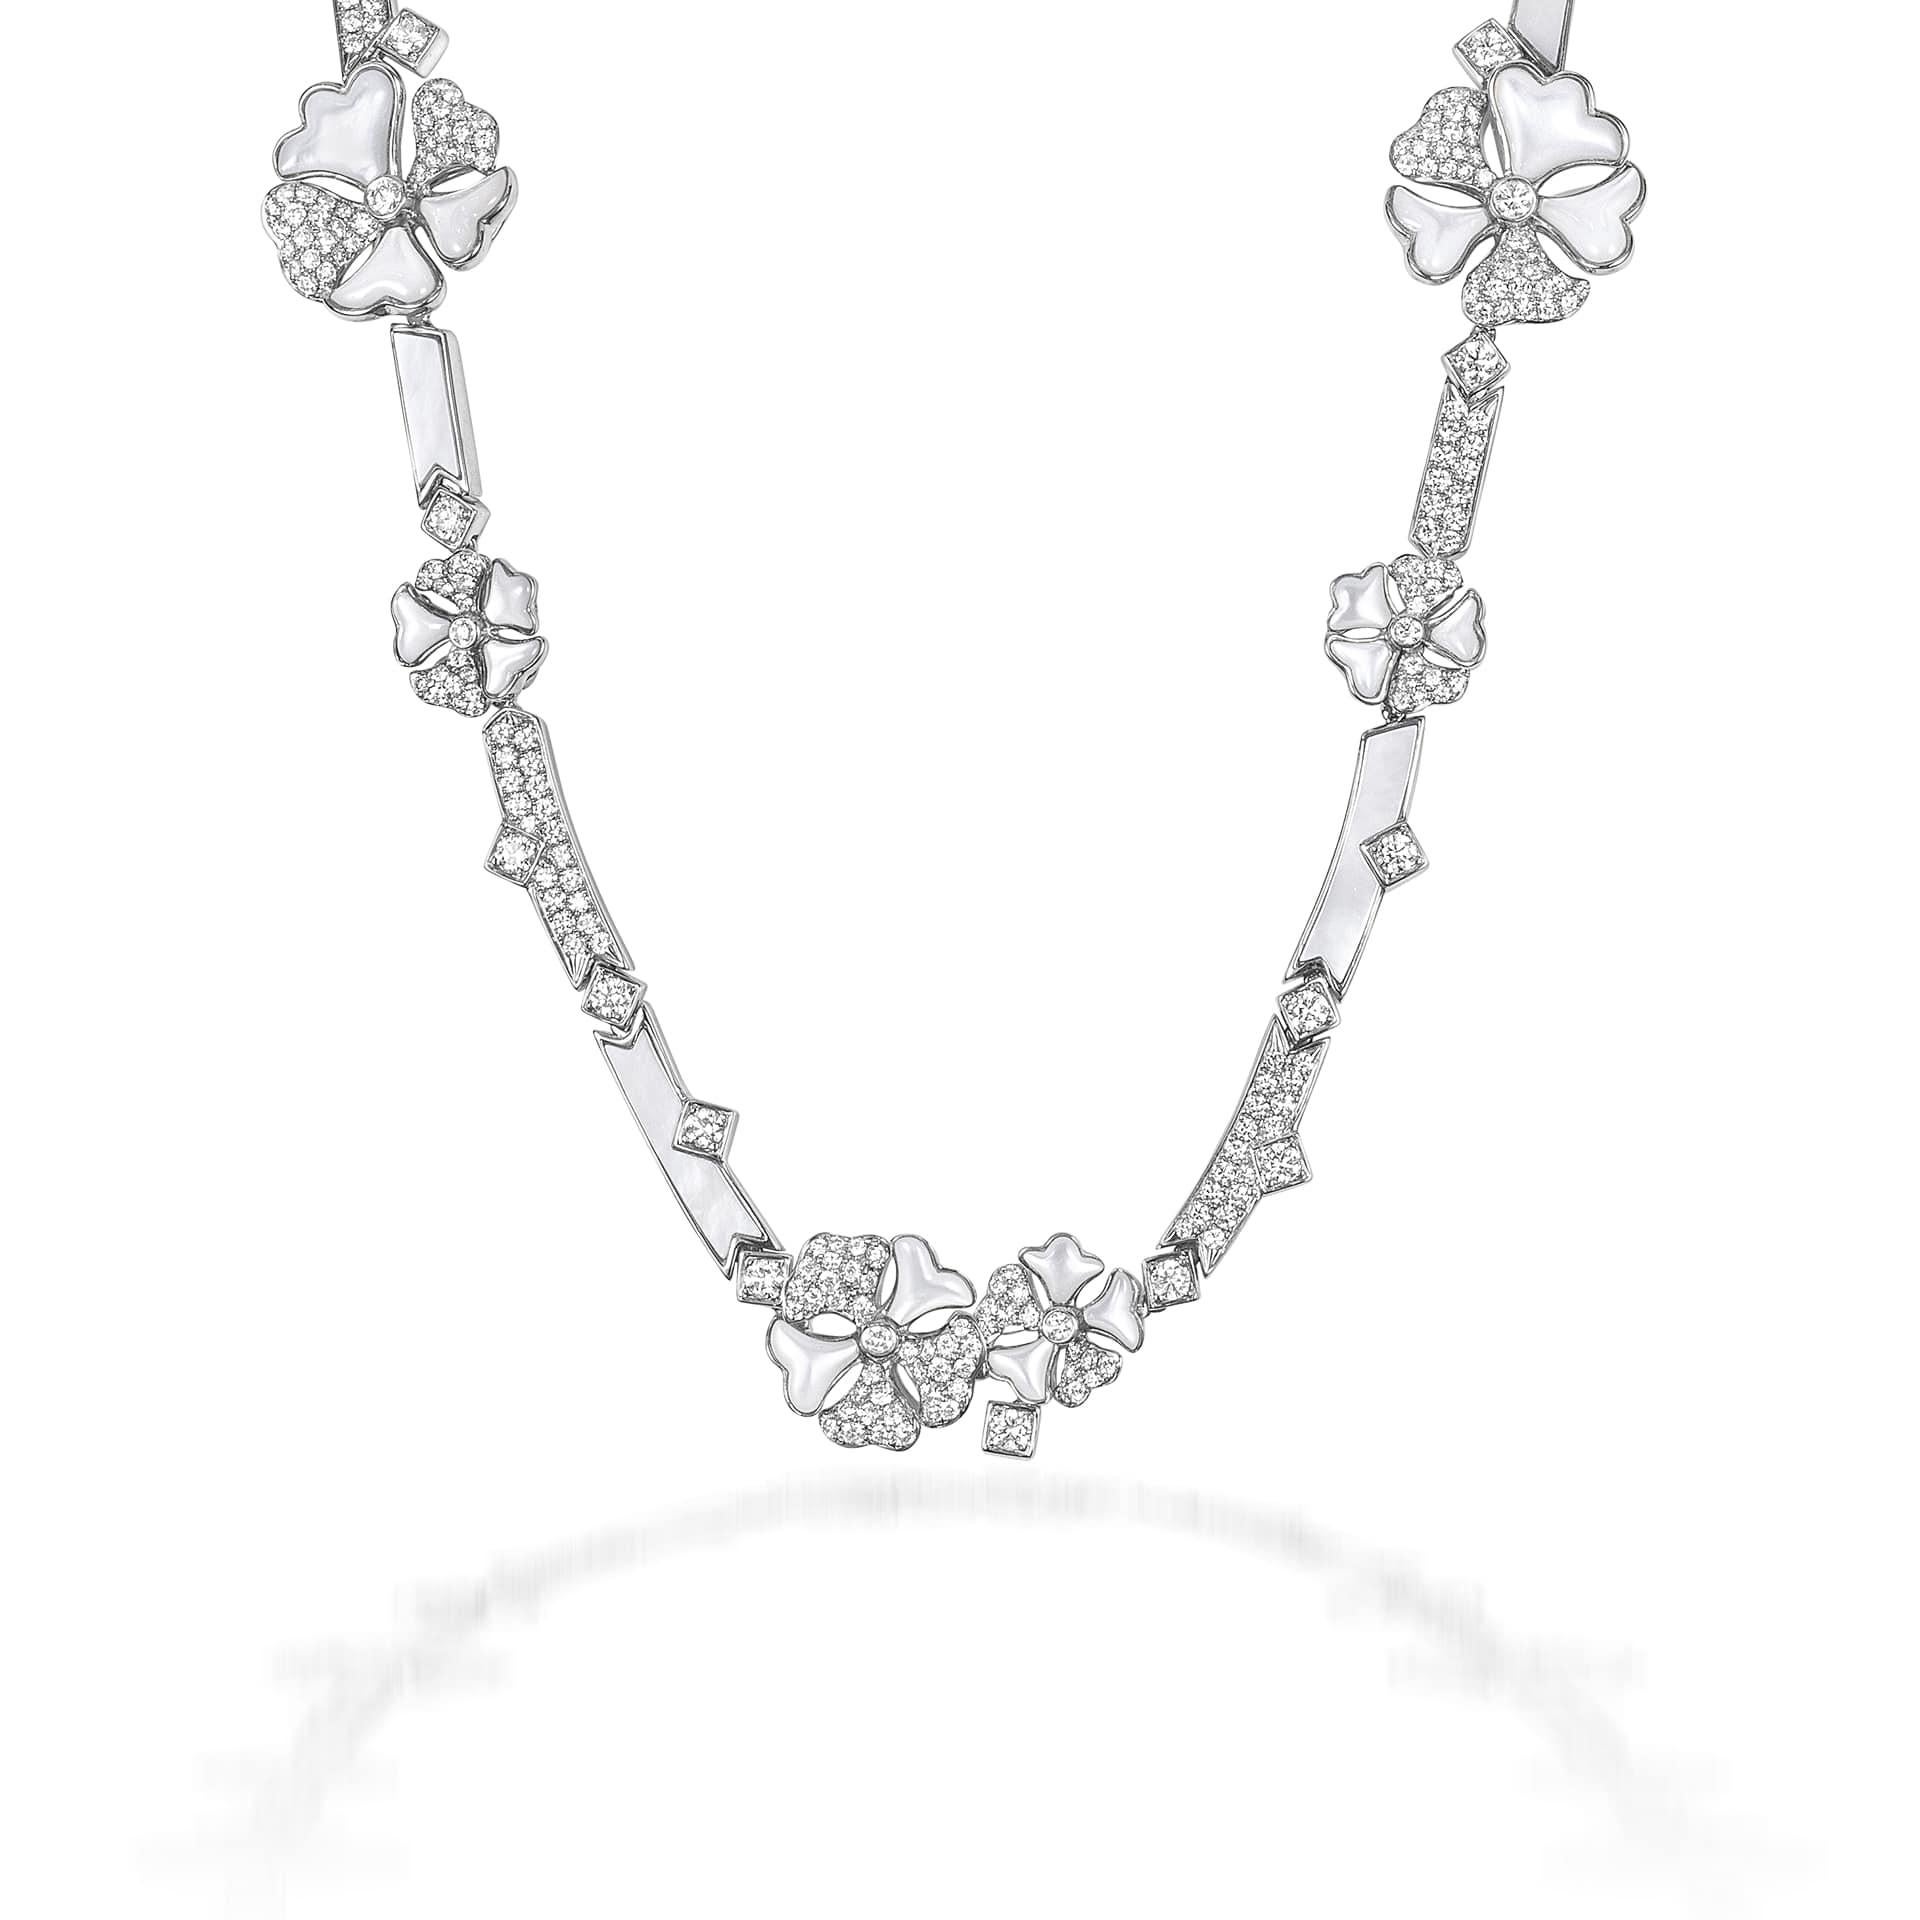 Bloom Diamond and Mother-of-Pearl Long Flower Chain Necklace in 18K White Gold

Inspired by the exquisite petals of the alpine cinquefoil flower, the Bloom collection combines the richness of diamonds and precious metals with the light versatility